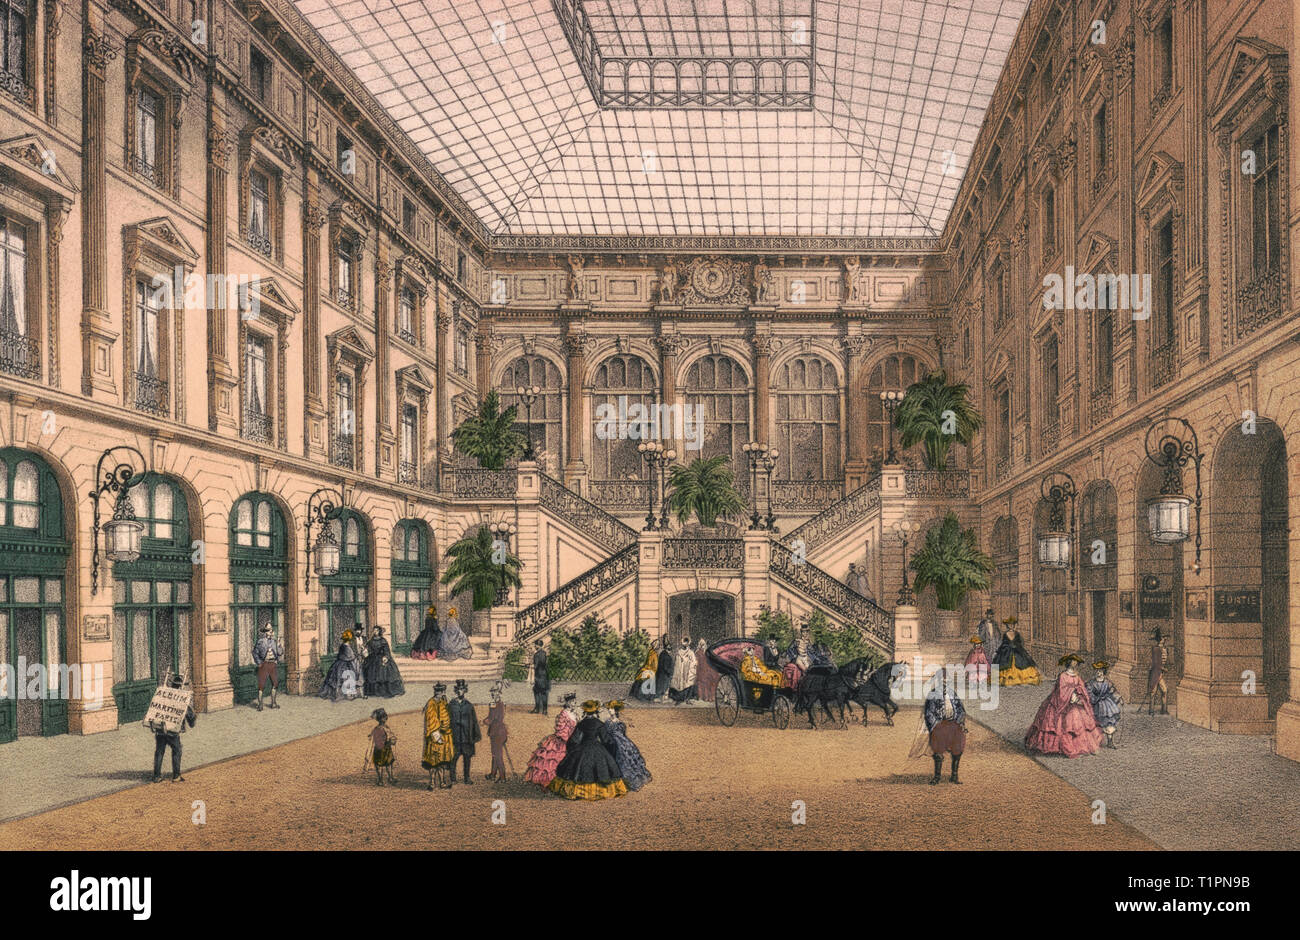 Paris. Cour du Grand Hotel du Louvre - Print shows an interior view of a covered courtyard with a horse-drawn carriage, pedestrians, and a street vendor selling papers labeled 'Album Martinet Paris'; also shows a large stairway at the far end and entrances to apartments or shops and to transportation facilities on the sides. Circa 1870 Stock Photo